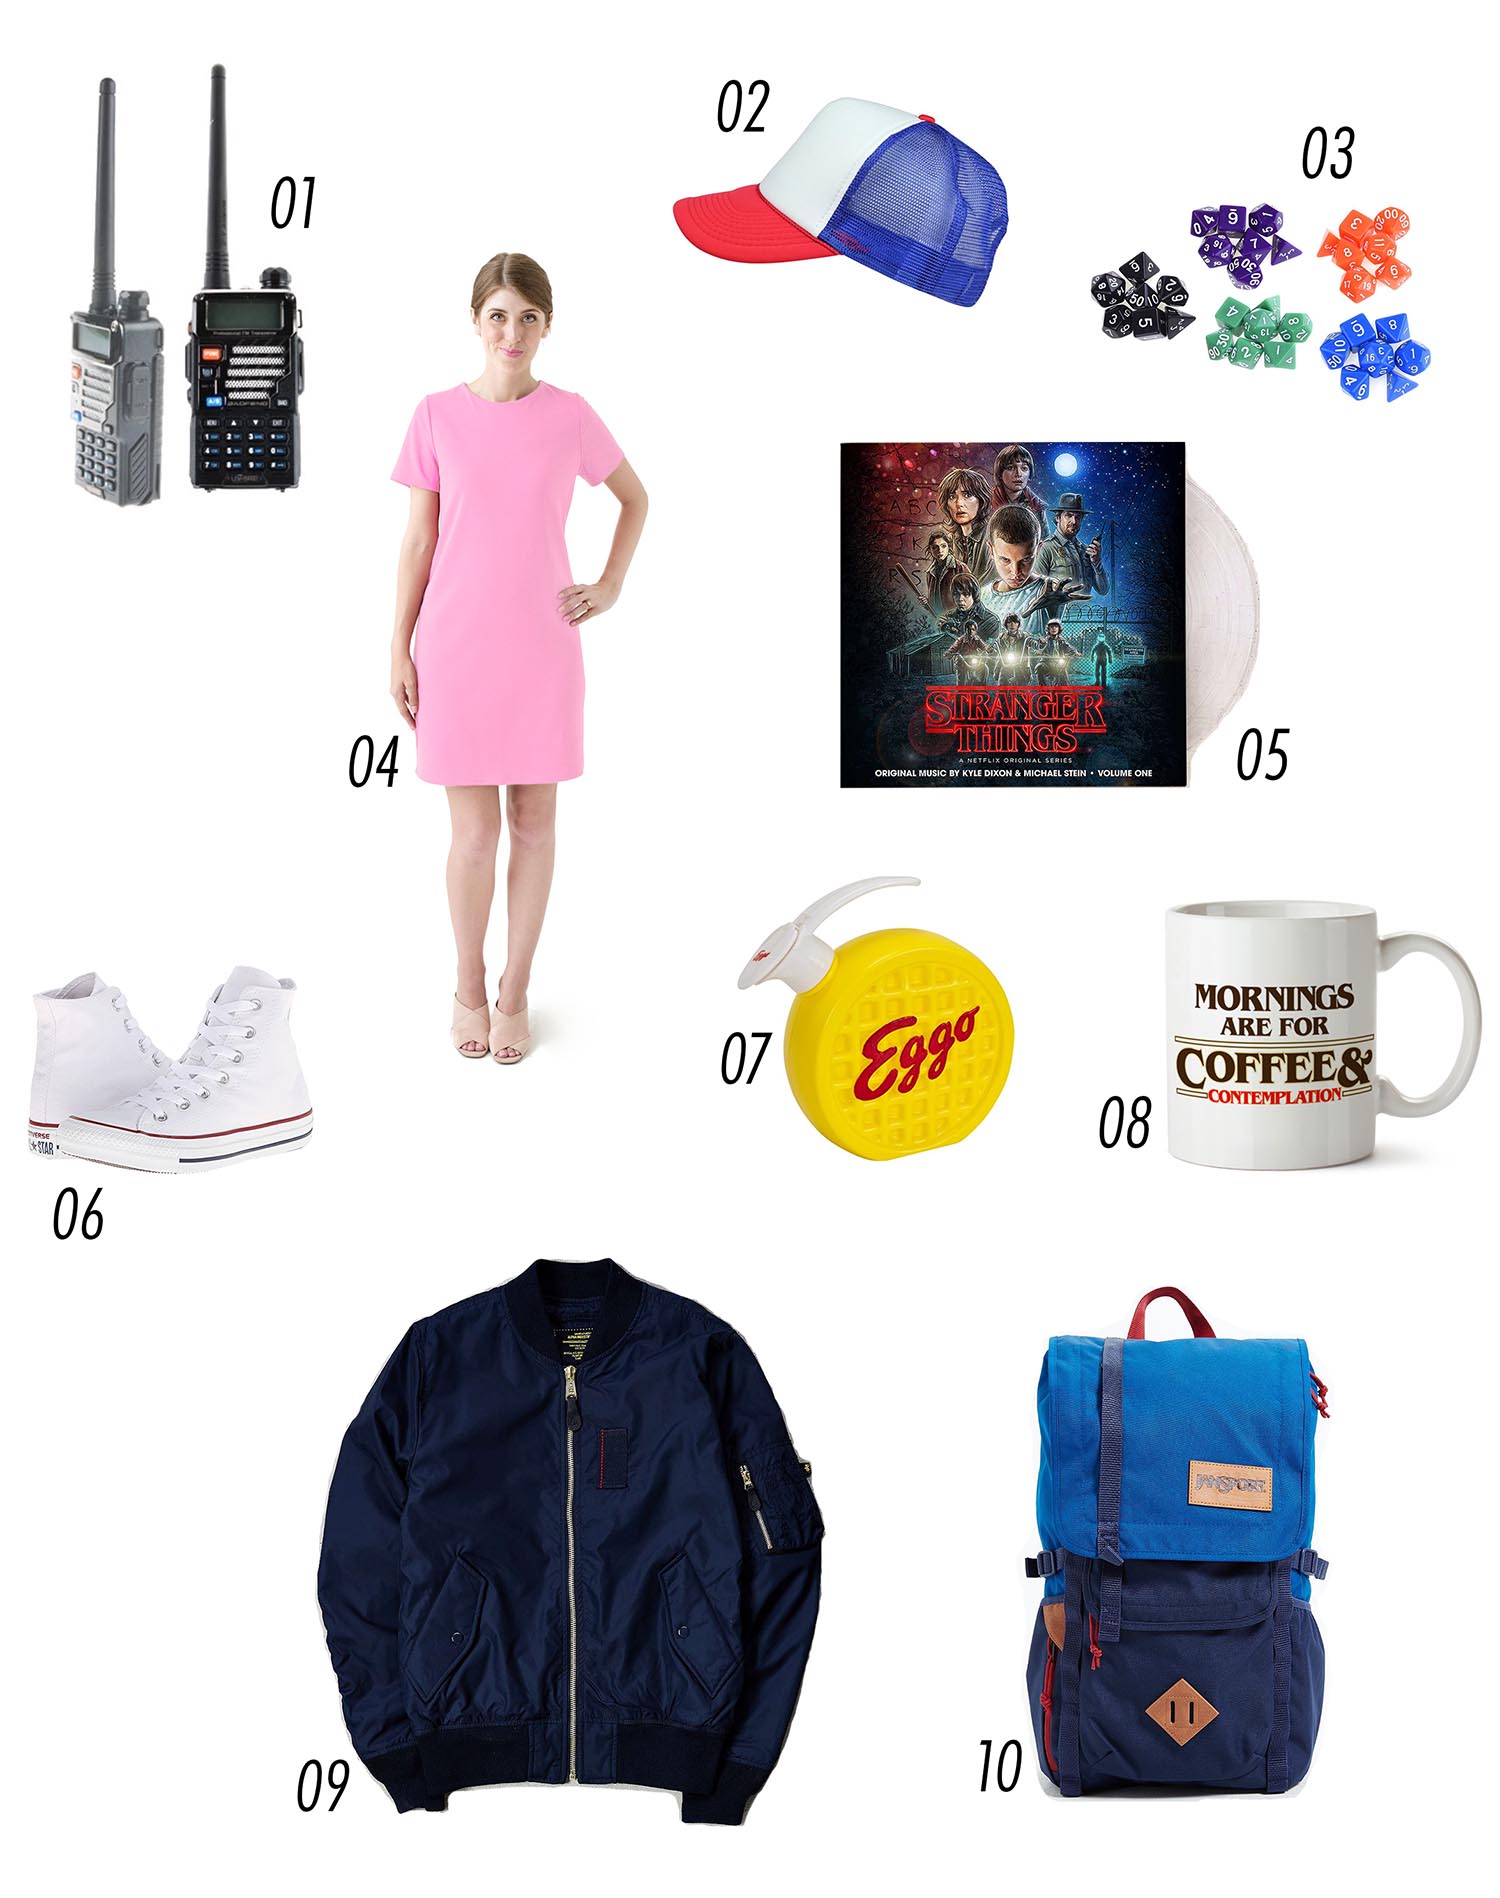 Stranger Things costume and gift guide